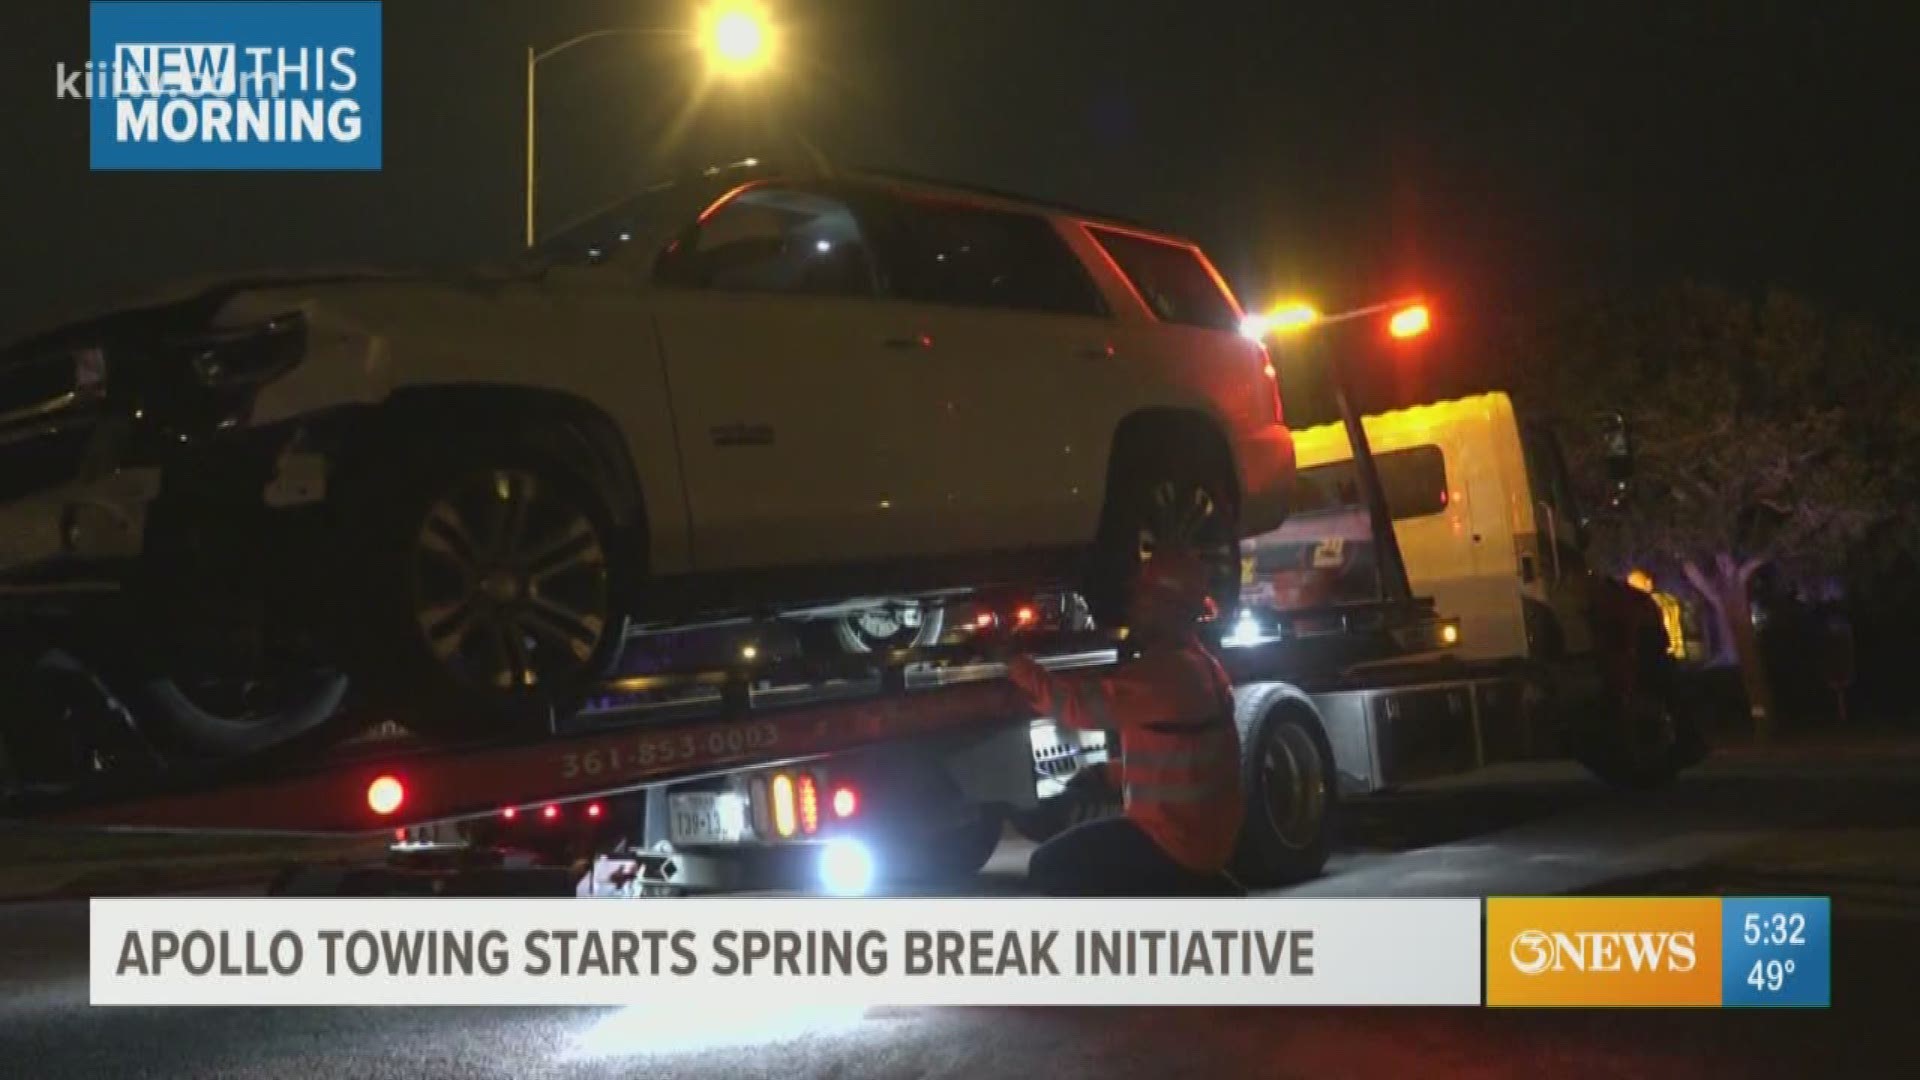 There is no excuse to drink and get behind the wheel this Spring Break with Apollo Towing's "No Excuse" program.